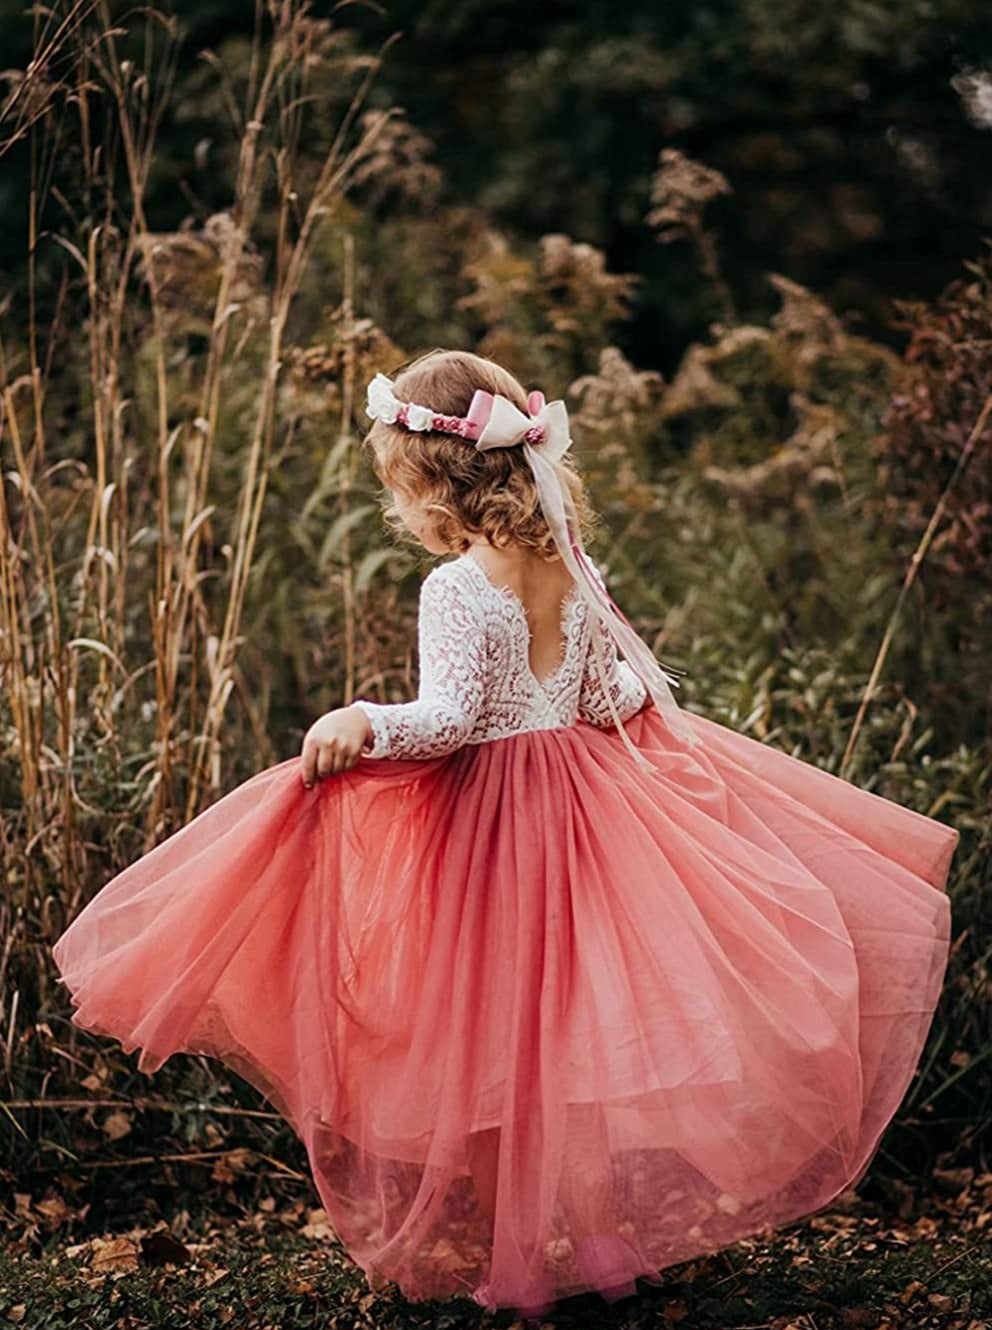 2Bunnies Flower Girl Dress Peony Lace Back A-Line Long Sleeve Straight Tulle Maxi (Dusty Pink) - 2BUNNIES